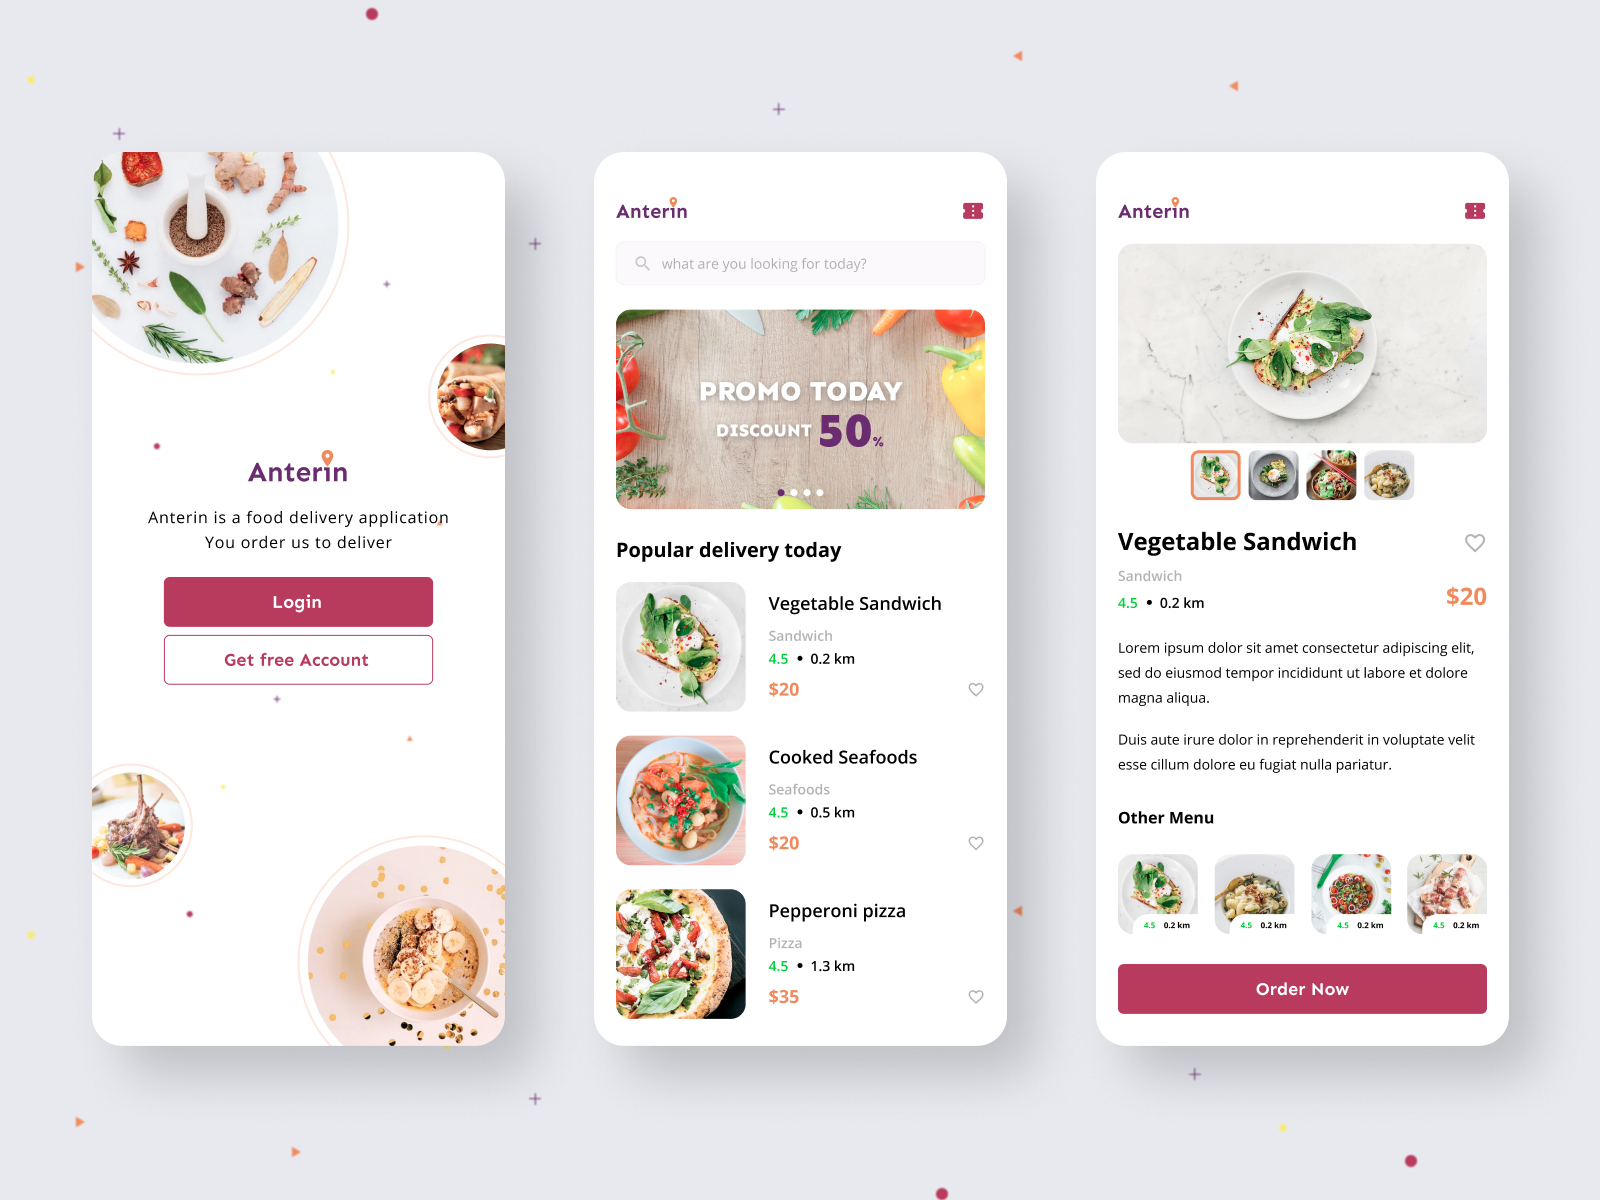 Food delivery app light version by Saiful Bahri on Dribbble